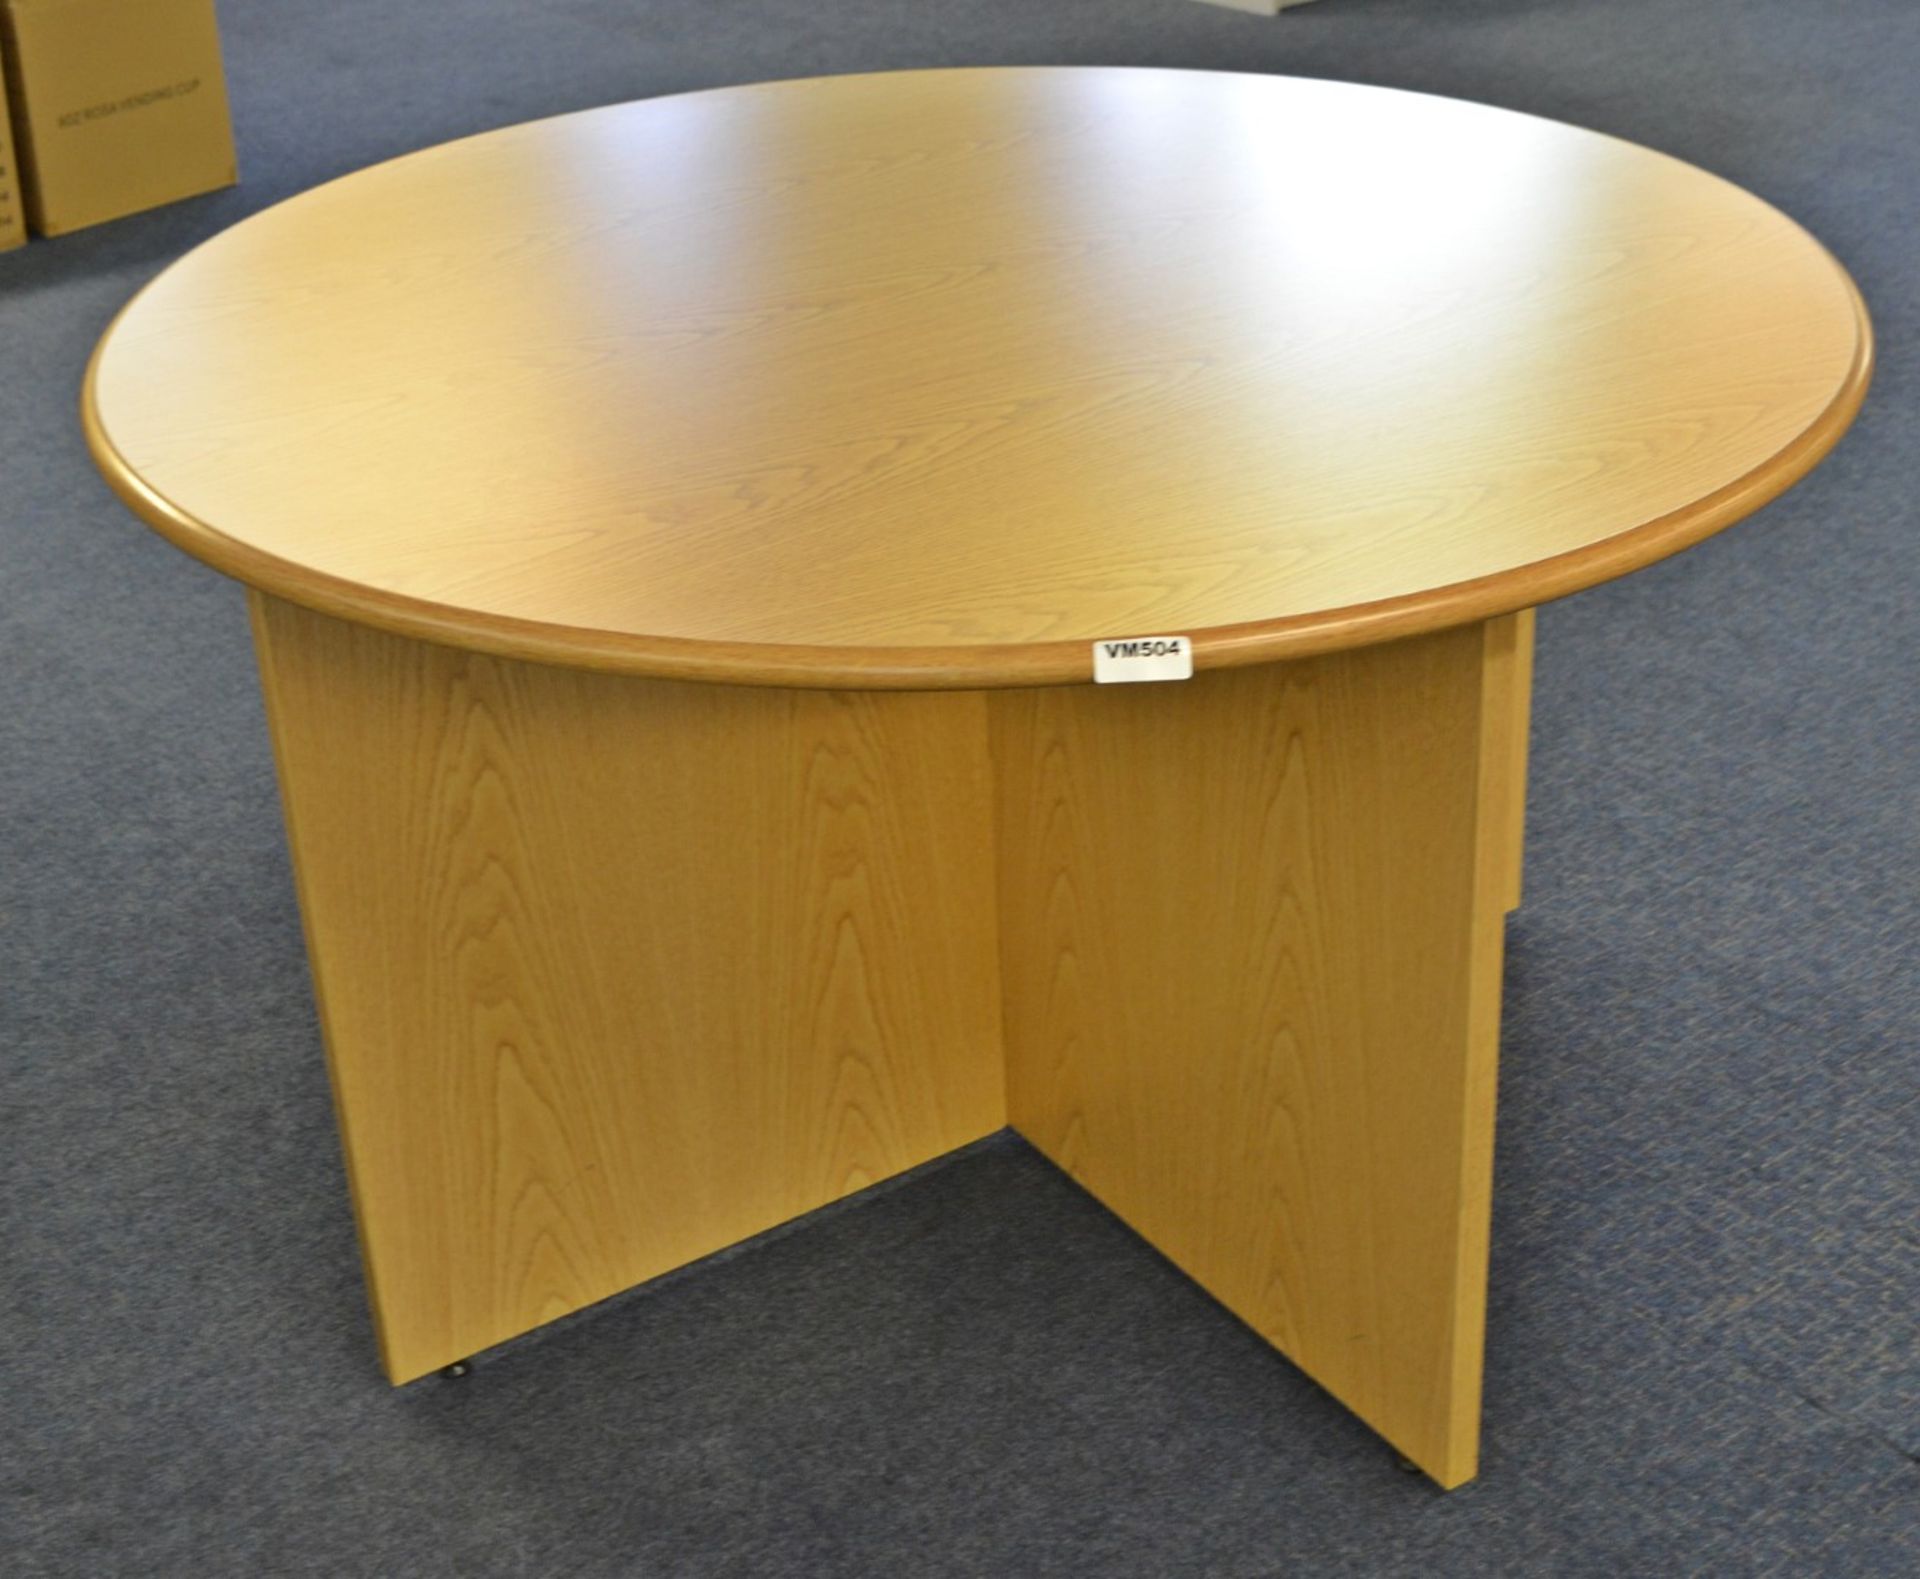 1 x Round Office Meeting Table - Ref: VM504 - CL409 - Location: Wakefield WF16